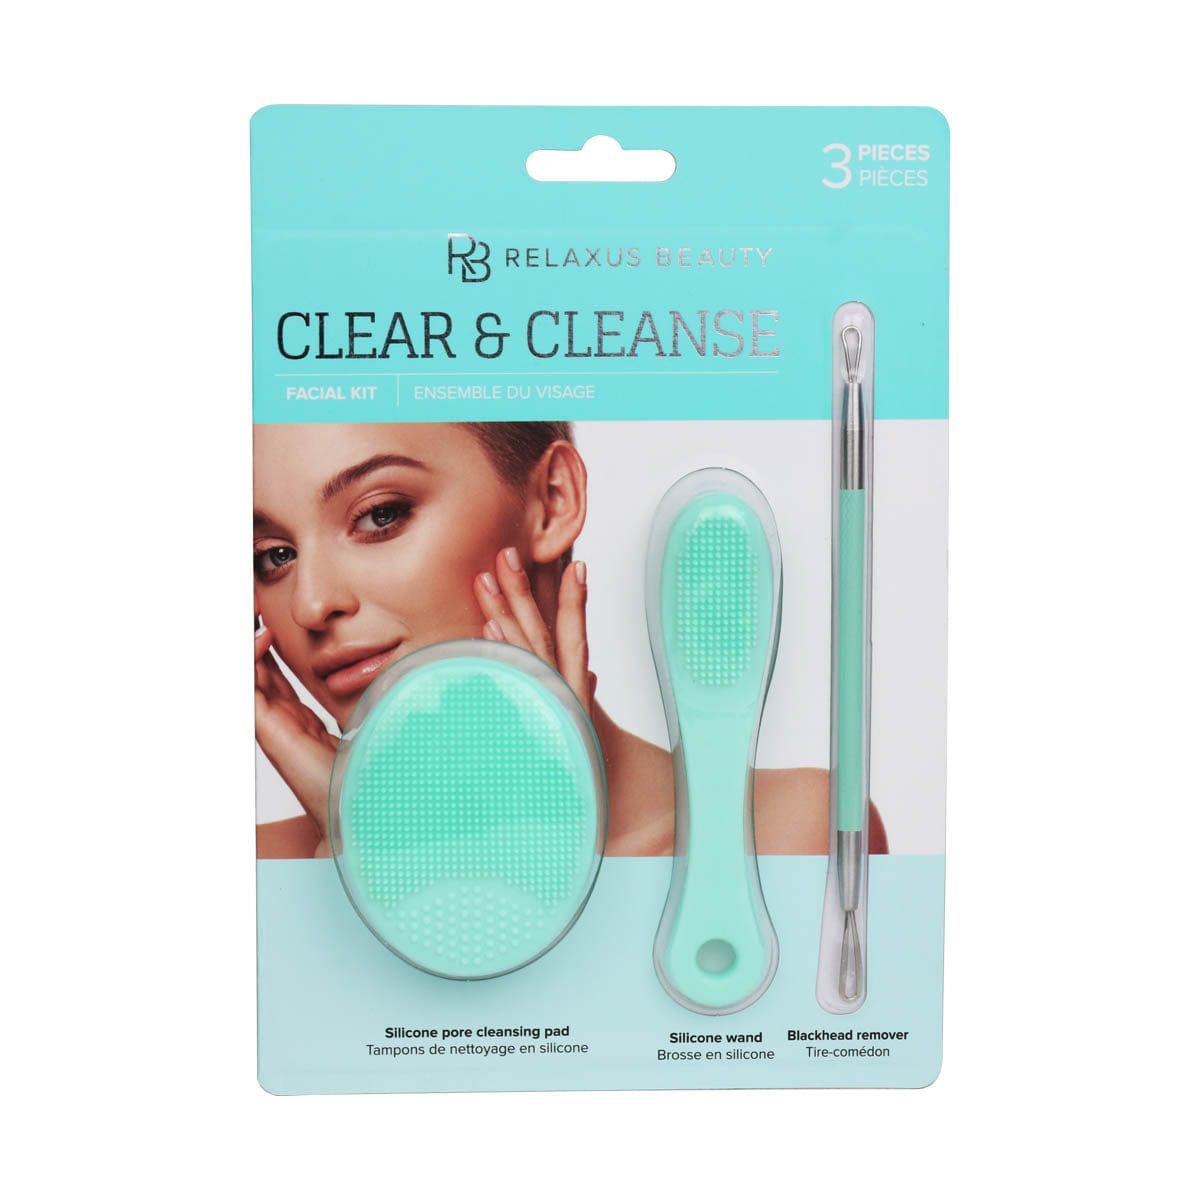 Clear & Cleanse Facial Kit (Set of 3) mint packaging